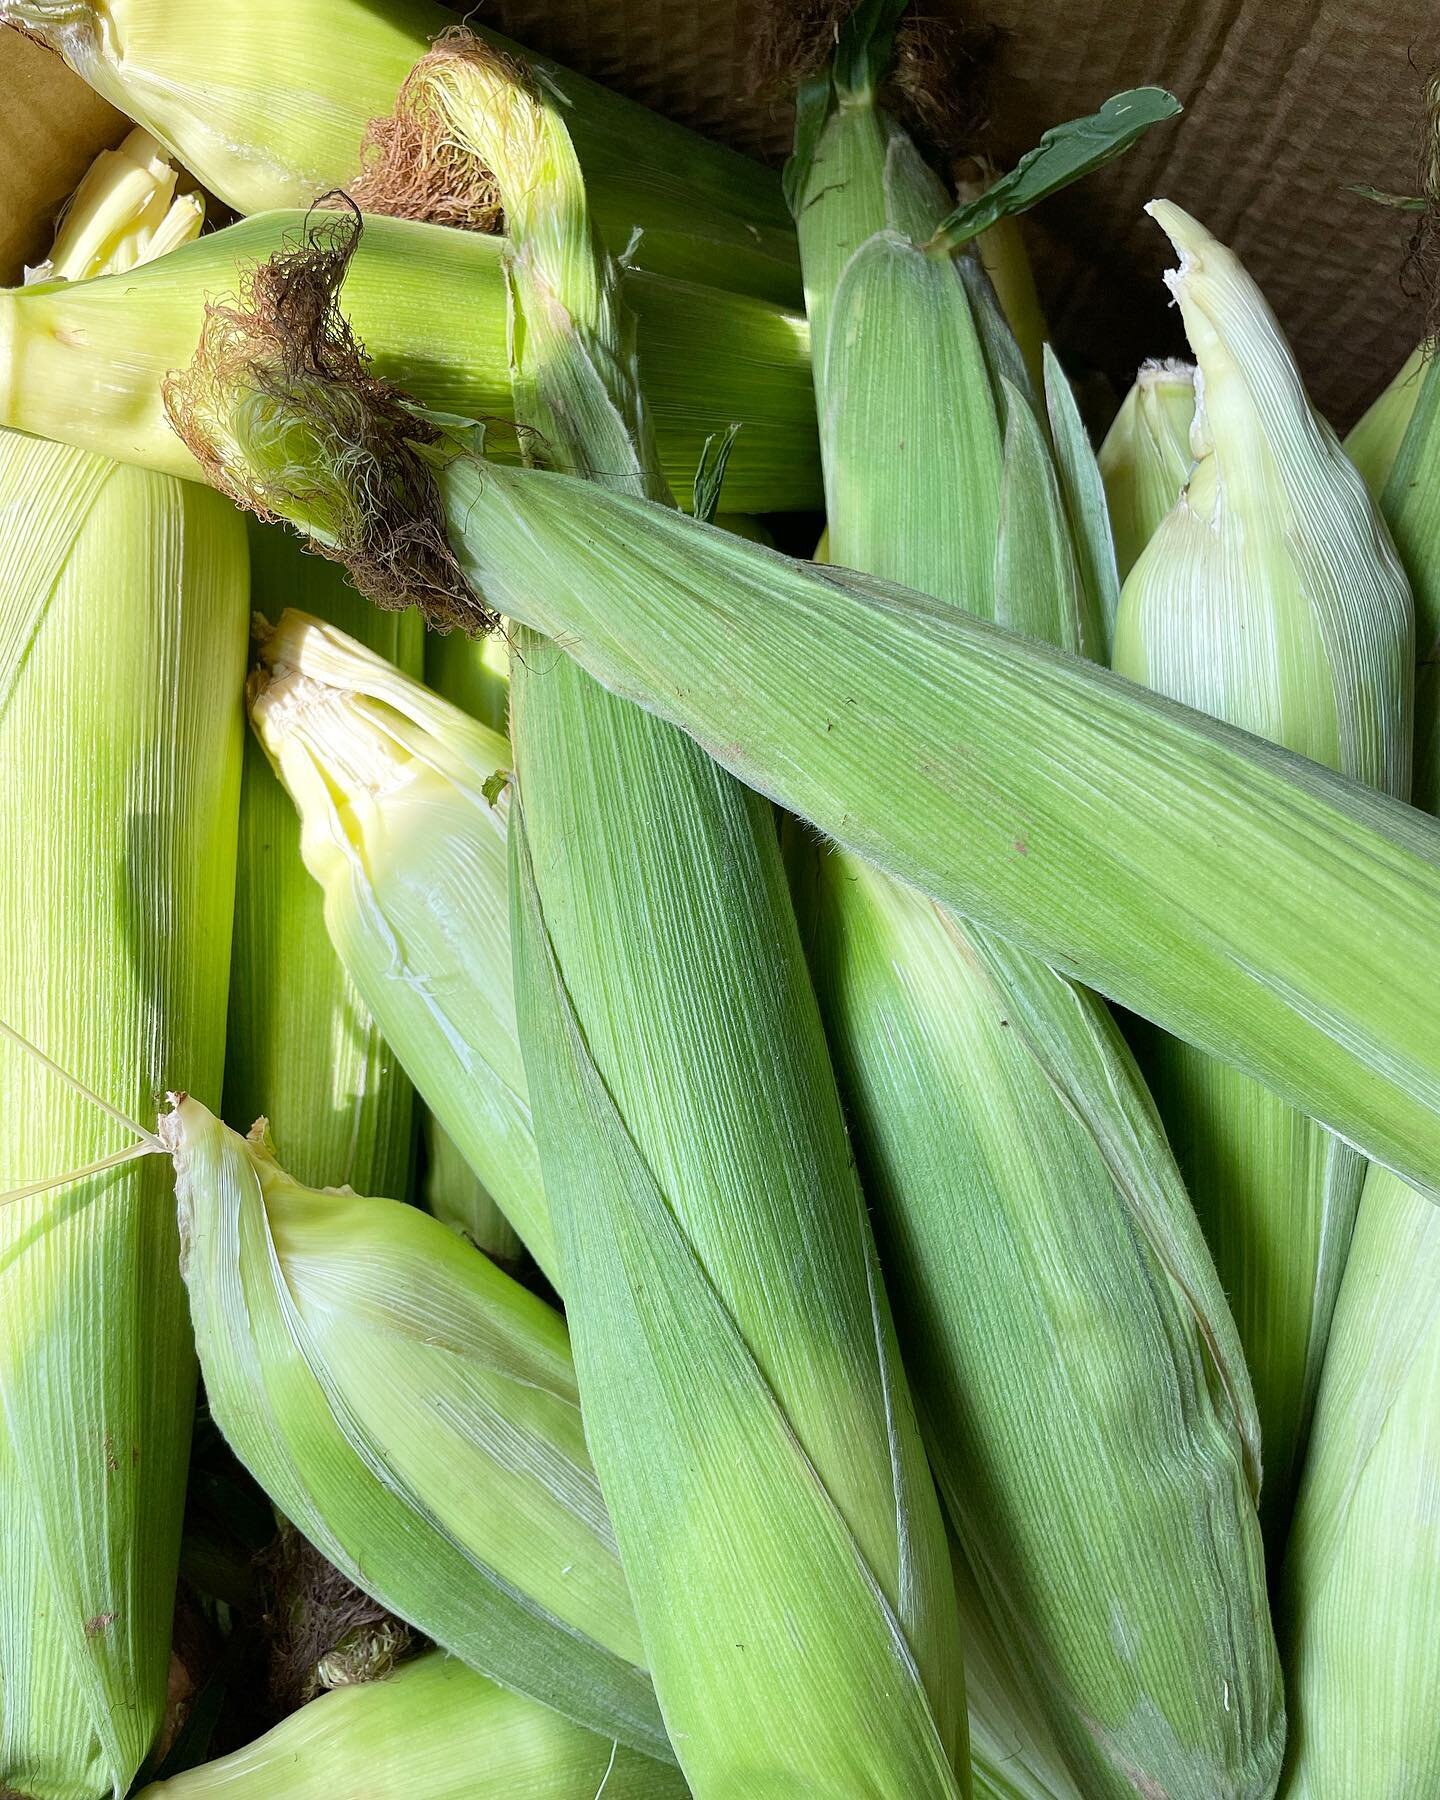 Who loves fresh corn?! We do! Let us know what your favorite corn dish is in the comments below 🌽 #movebunkieforward